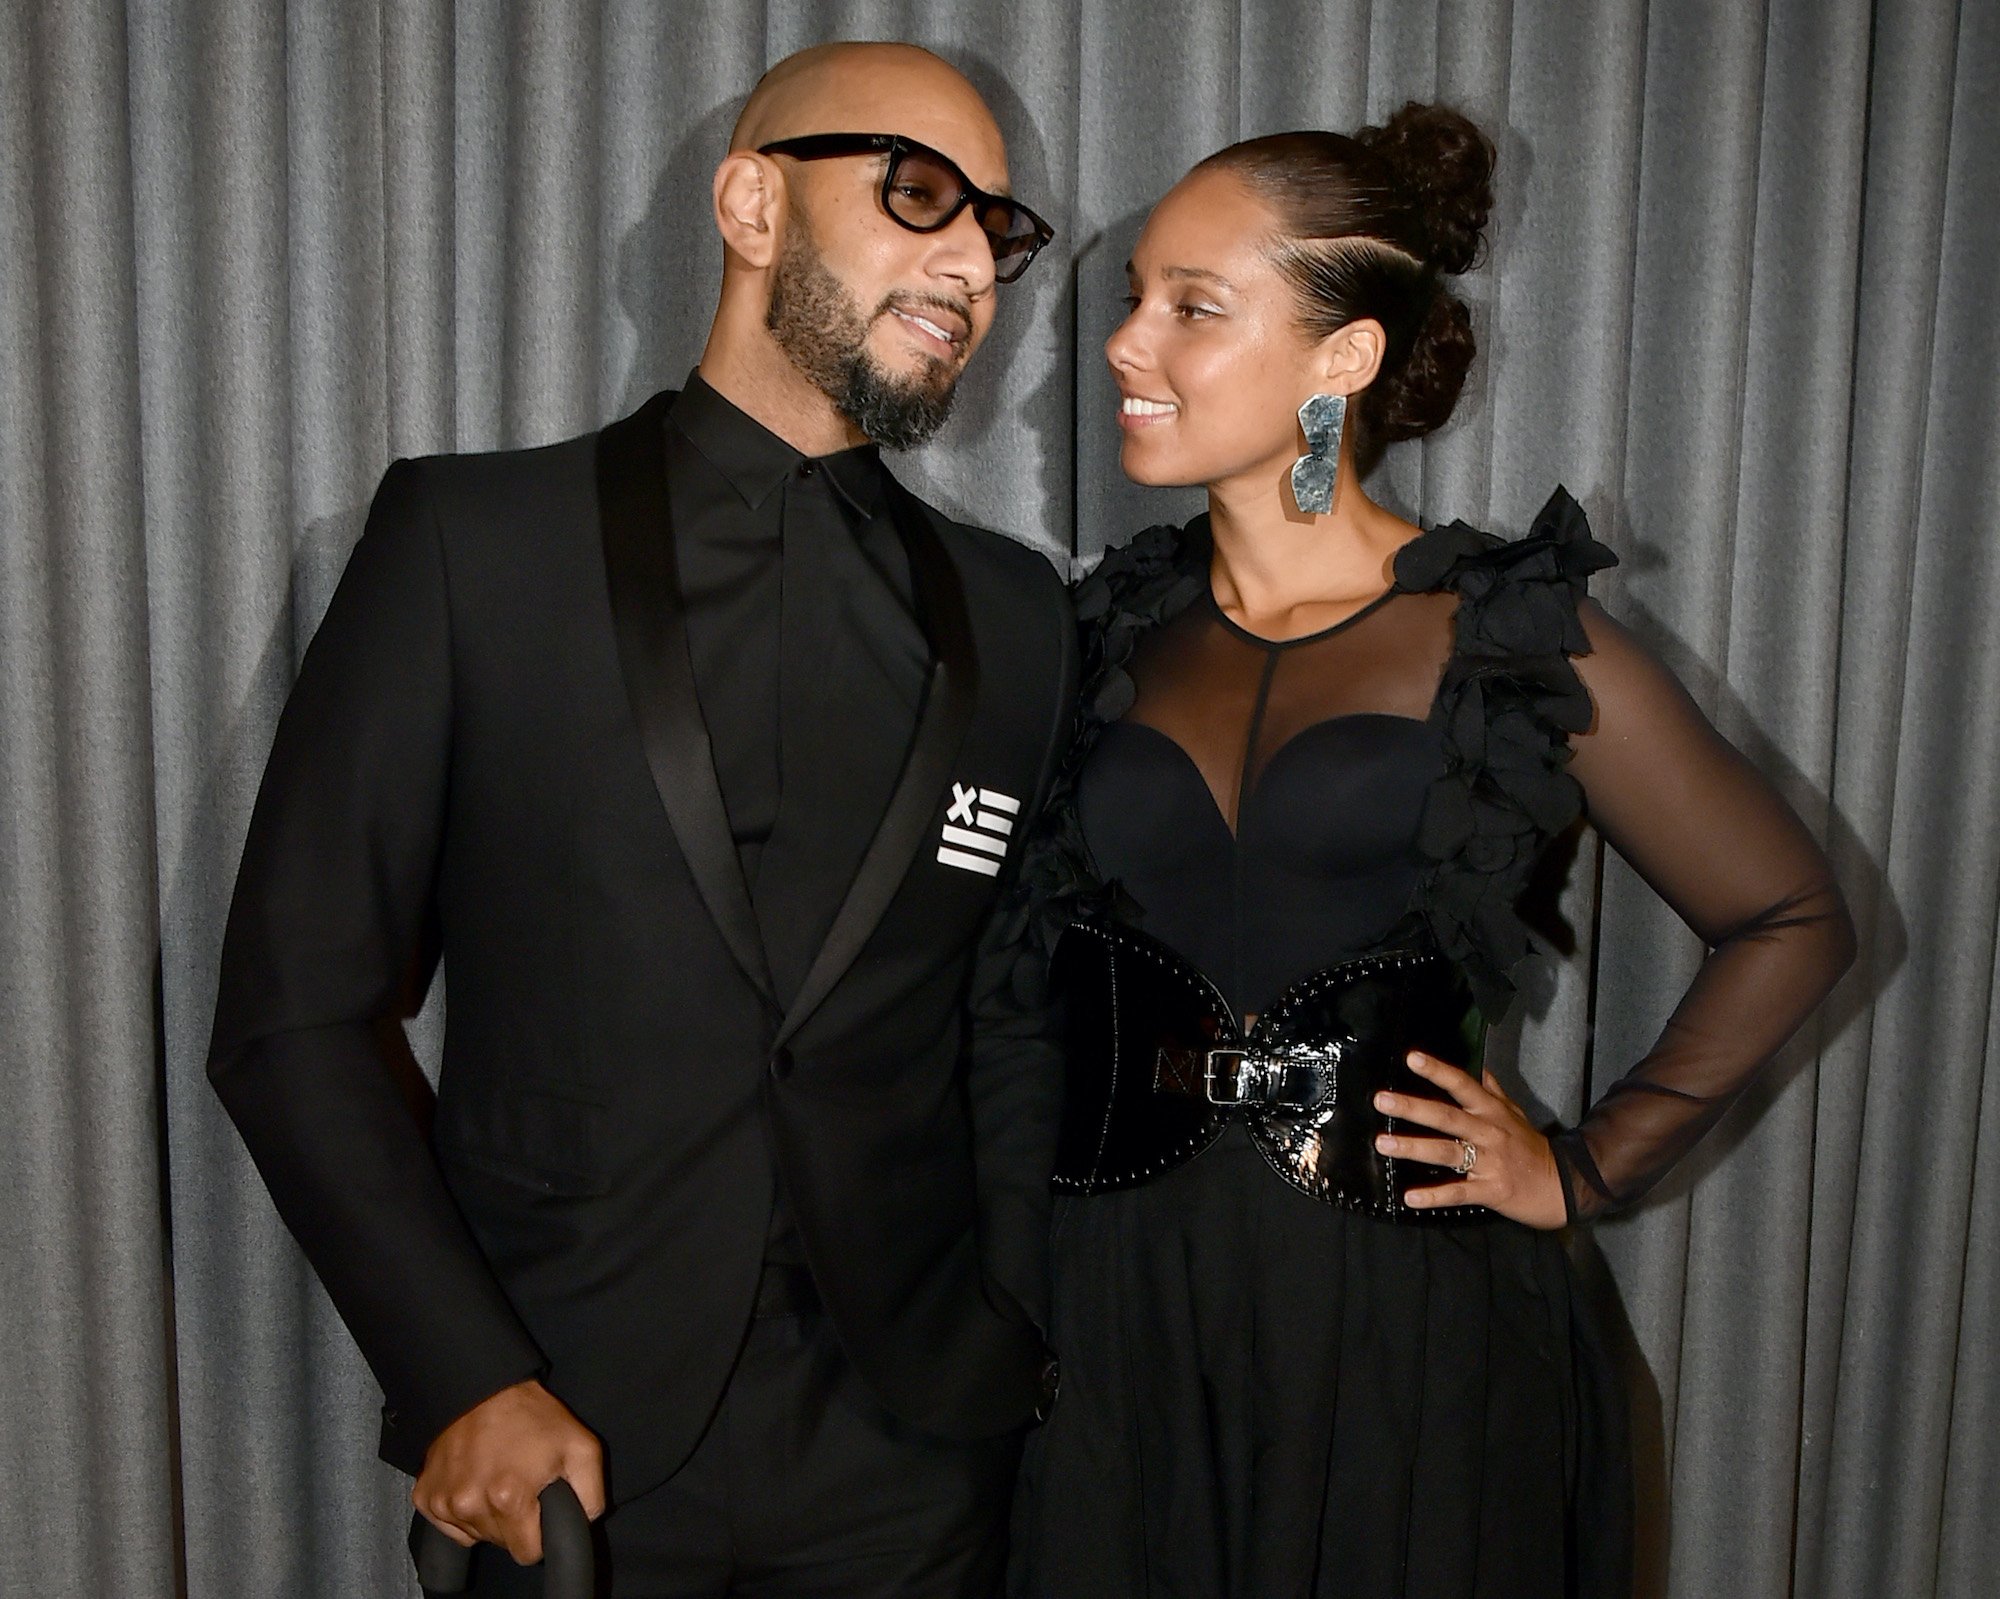 Swizz Beats and Alicia Keys, turned slightly to each other, smiling